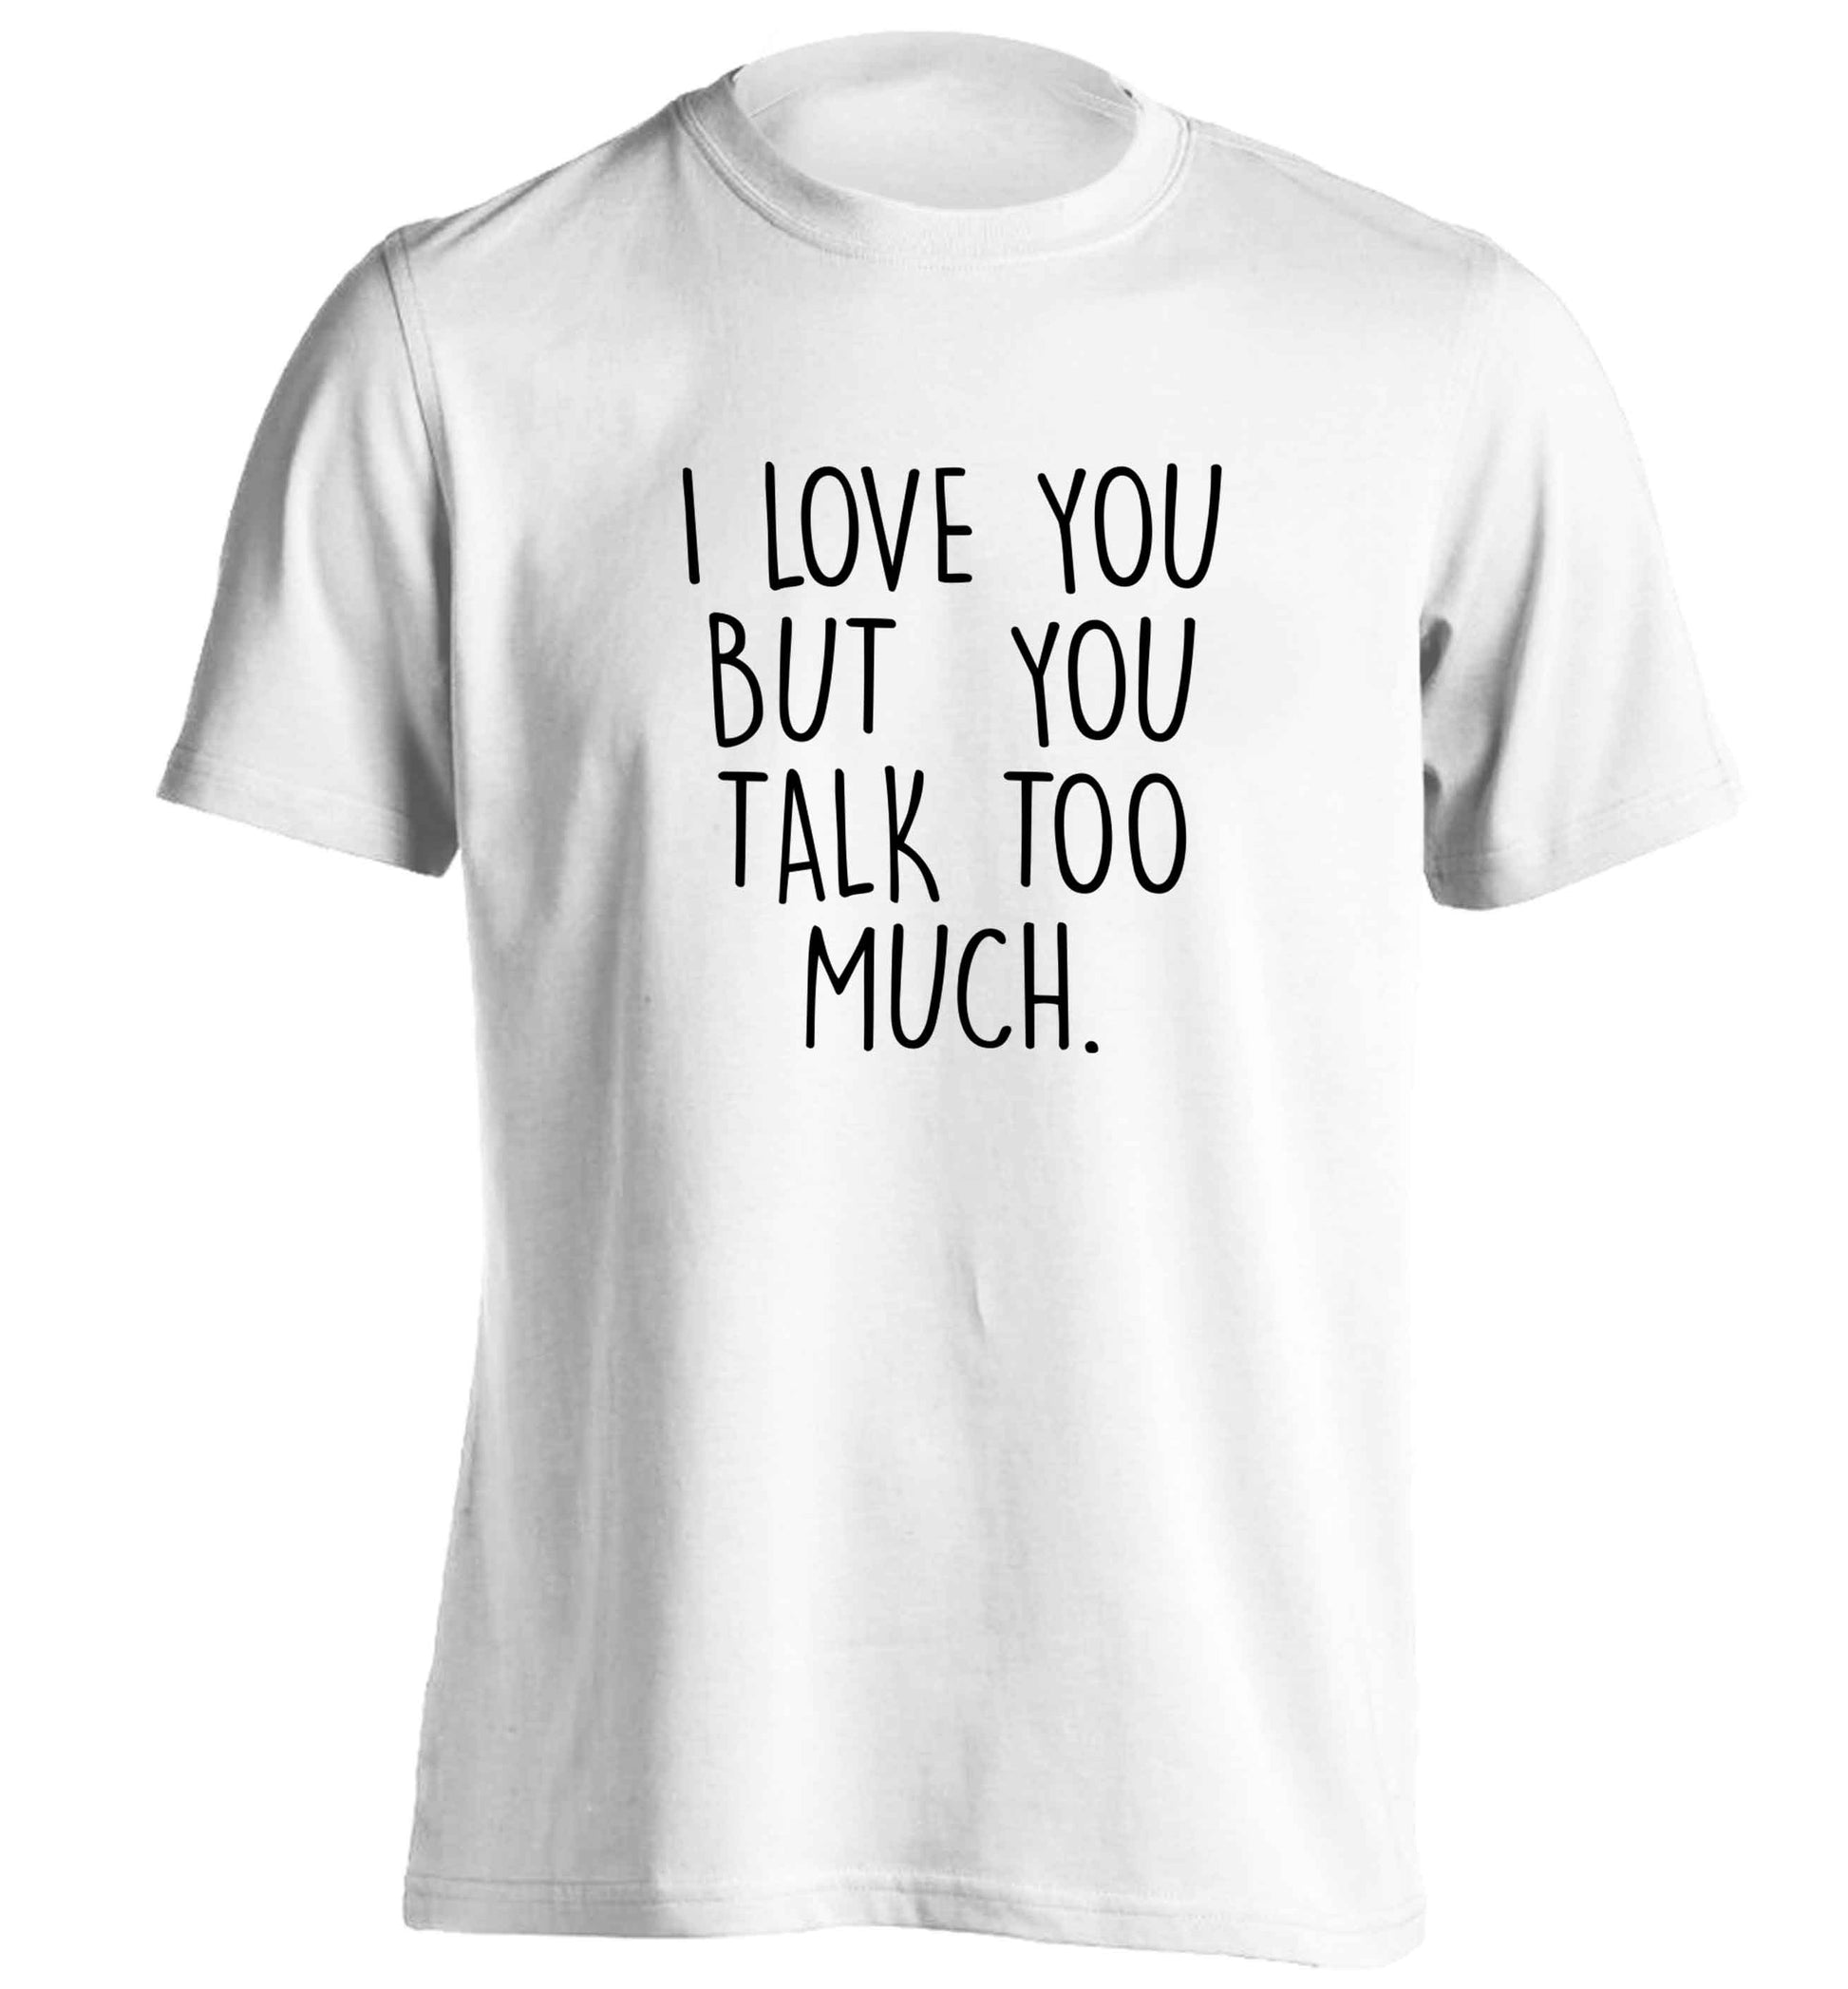 I love you but you talk too much adults unisex white Tshirt 2XL